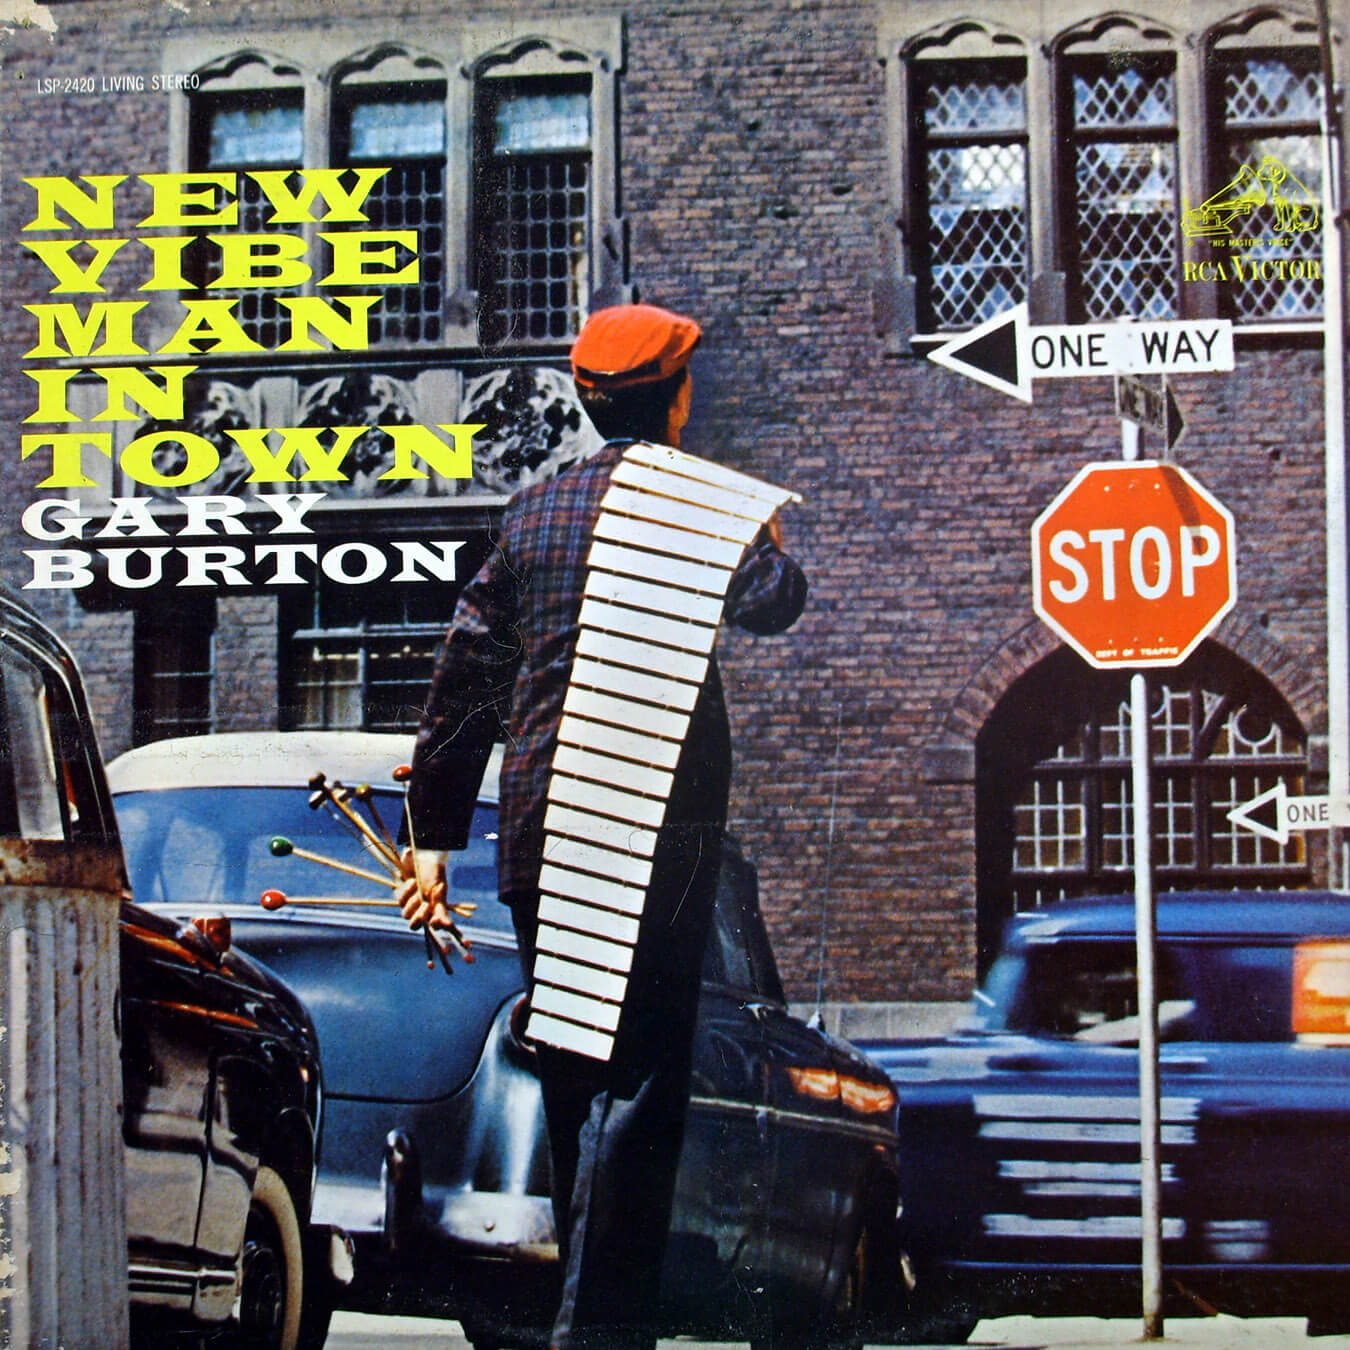 gary-burton-new-vibes-man-in-town-front4